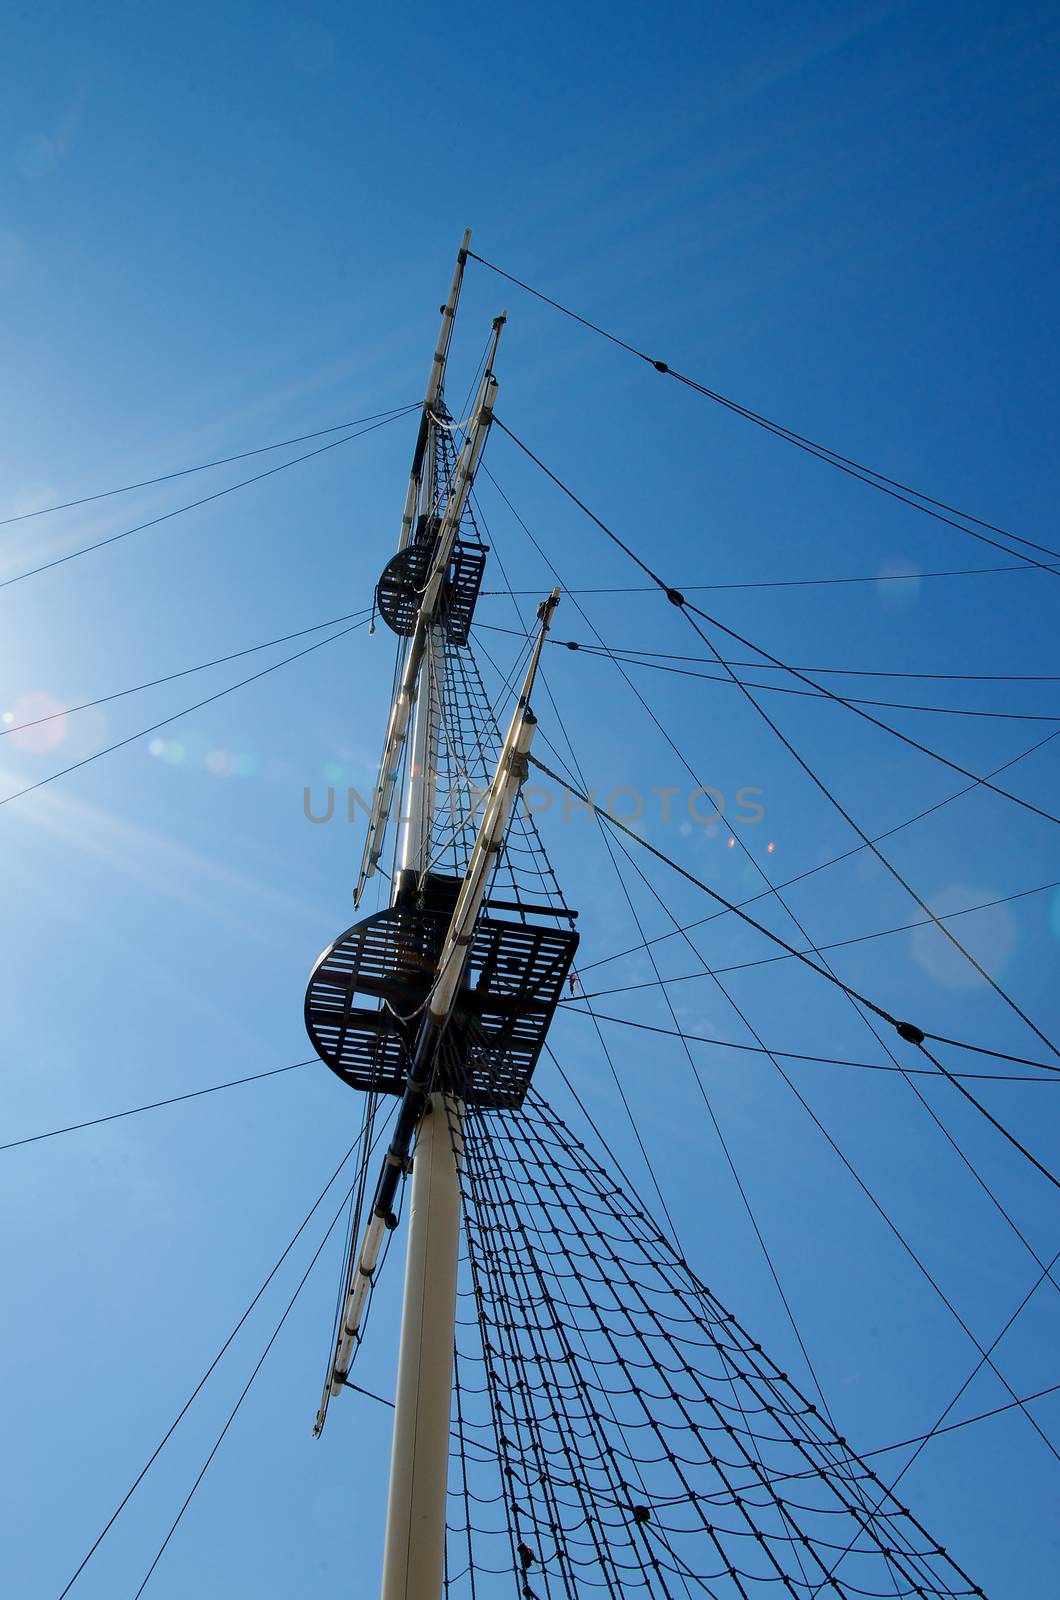 Sailboat Mast and Ropes isolated on Blue Sunny Sky background Outdoors